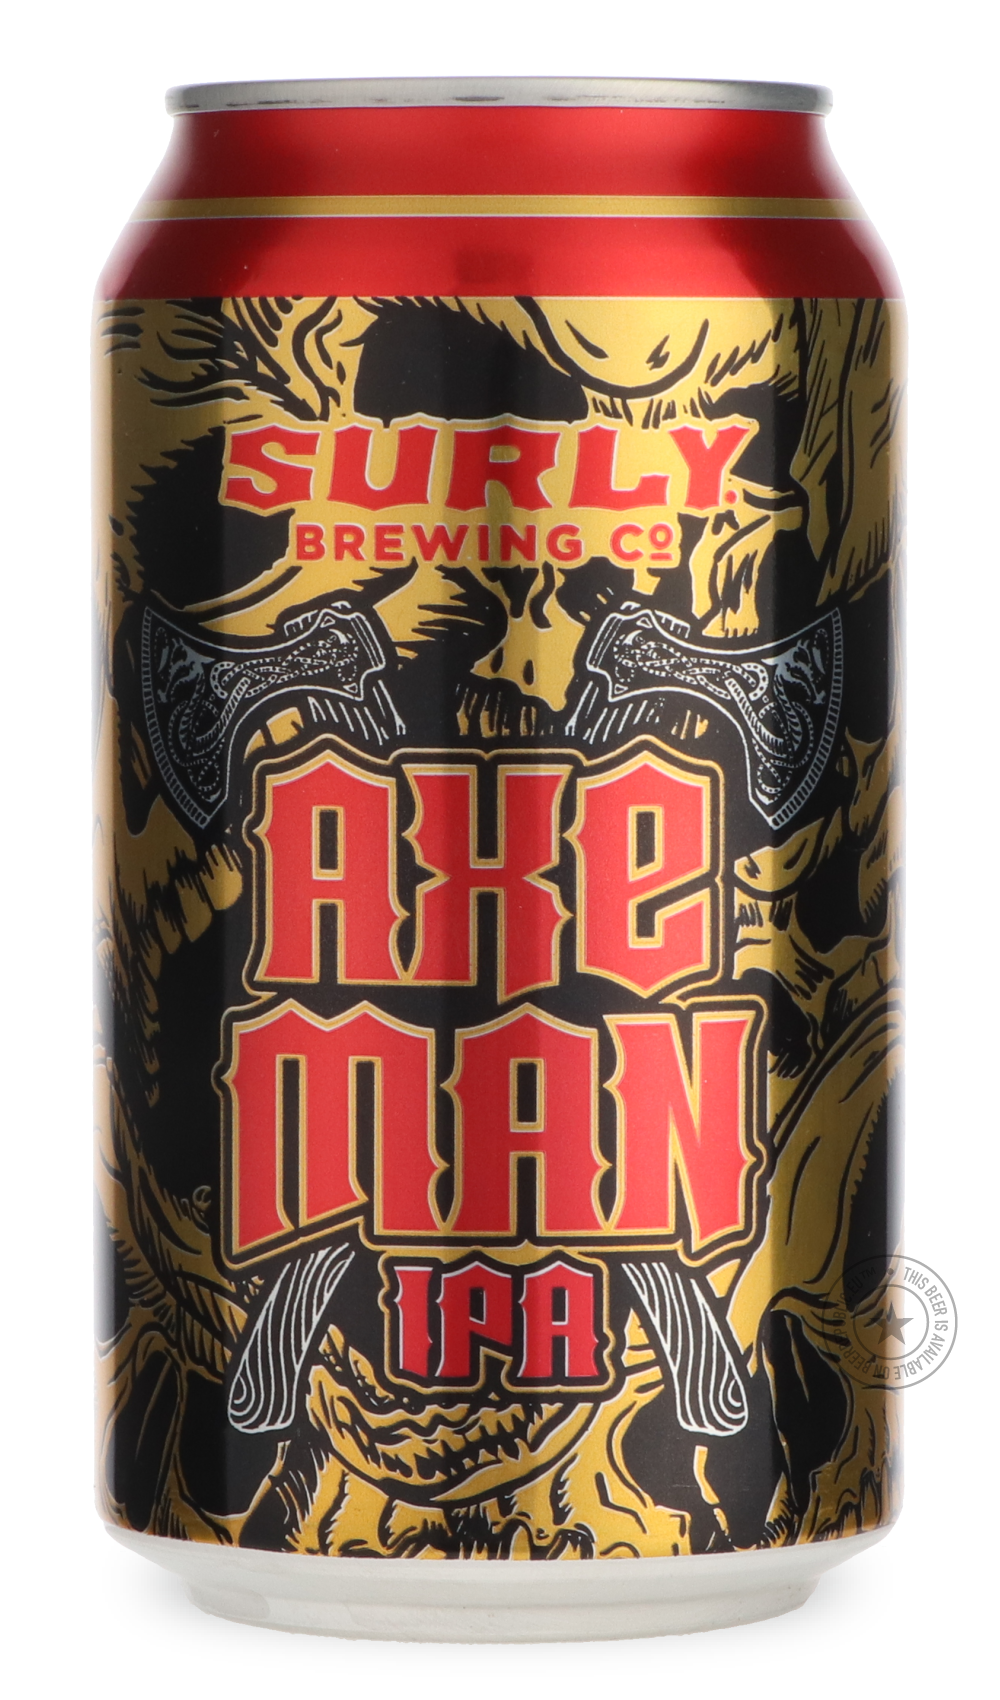 -Surly- Axe Man / Amager-IPA- Only @ Beer Republic - The best online beer store for American & Canadian craft beer - Buy beer online from the USA and Canada - Bier online kopen - Amerikaans bier kopen - Craft beer store - Craft beer kopen - Amerikanisch bier kaufen - Bier online kaufen - Acheter biere online - IPA - Stout - Porter - New England IPA - Hazy IPA - Imperial Stout - Barrel Aged - Barrel Aged Imperial Stout - Brown - Dark beer - Blond - Blonde - Pilsner - Lager - Wheat - Weizen - Amber - Barley W